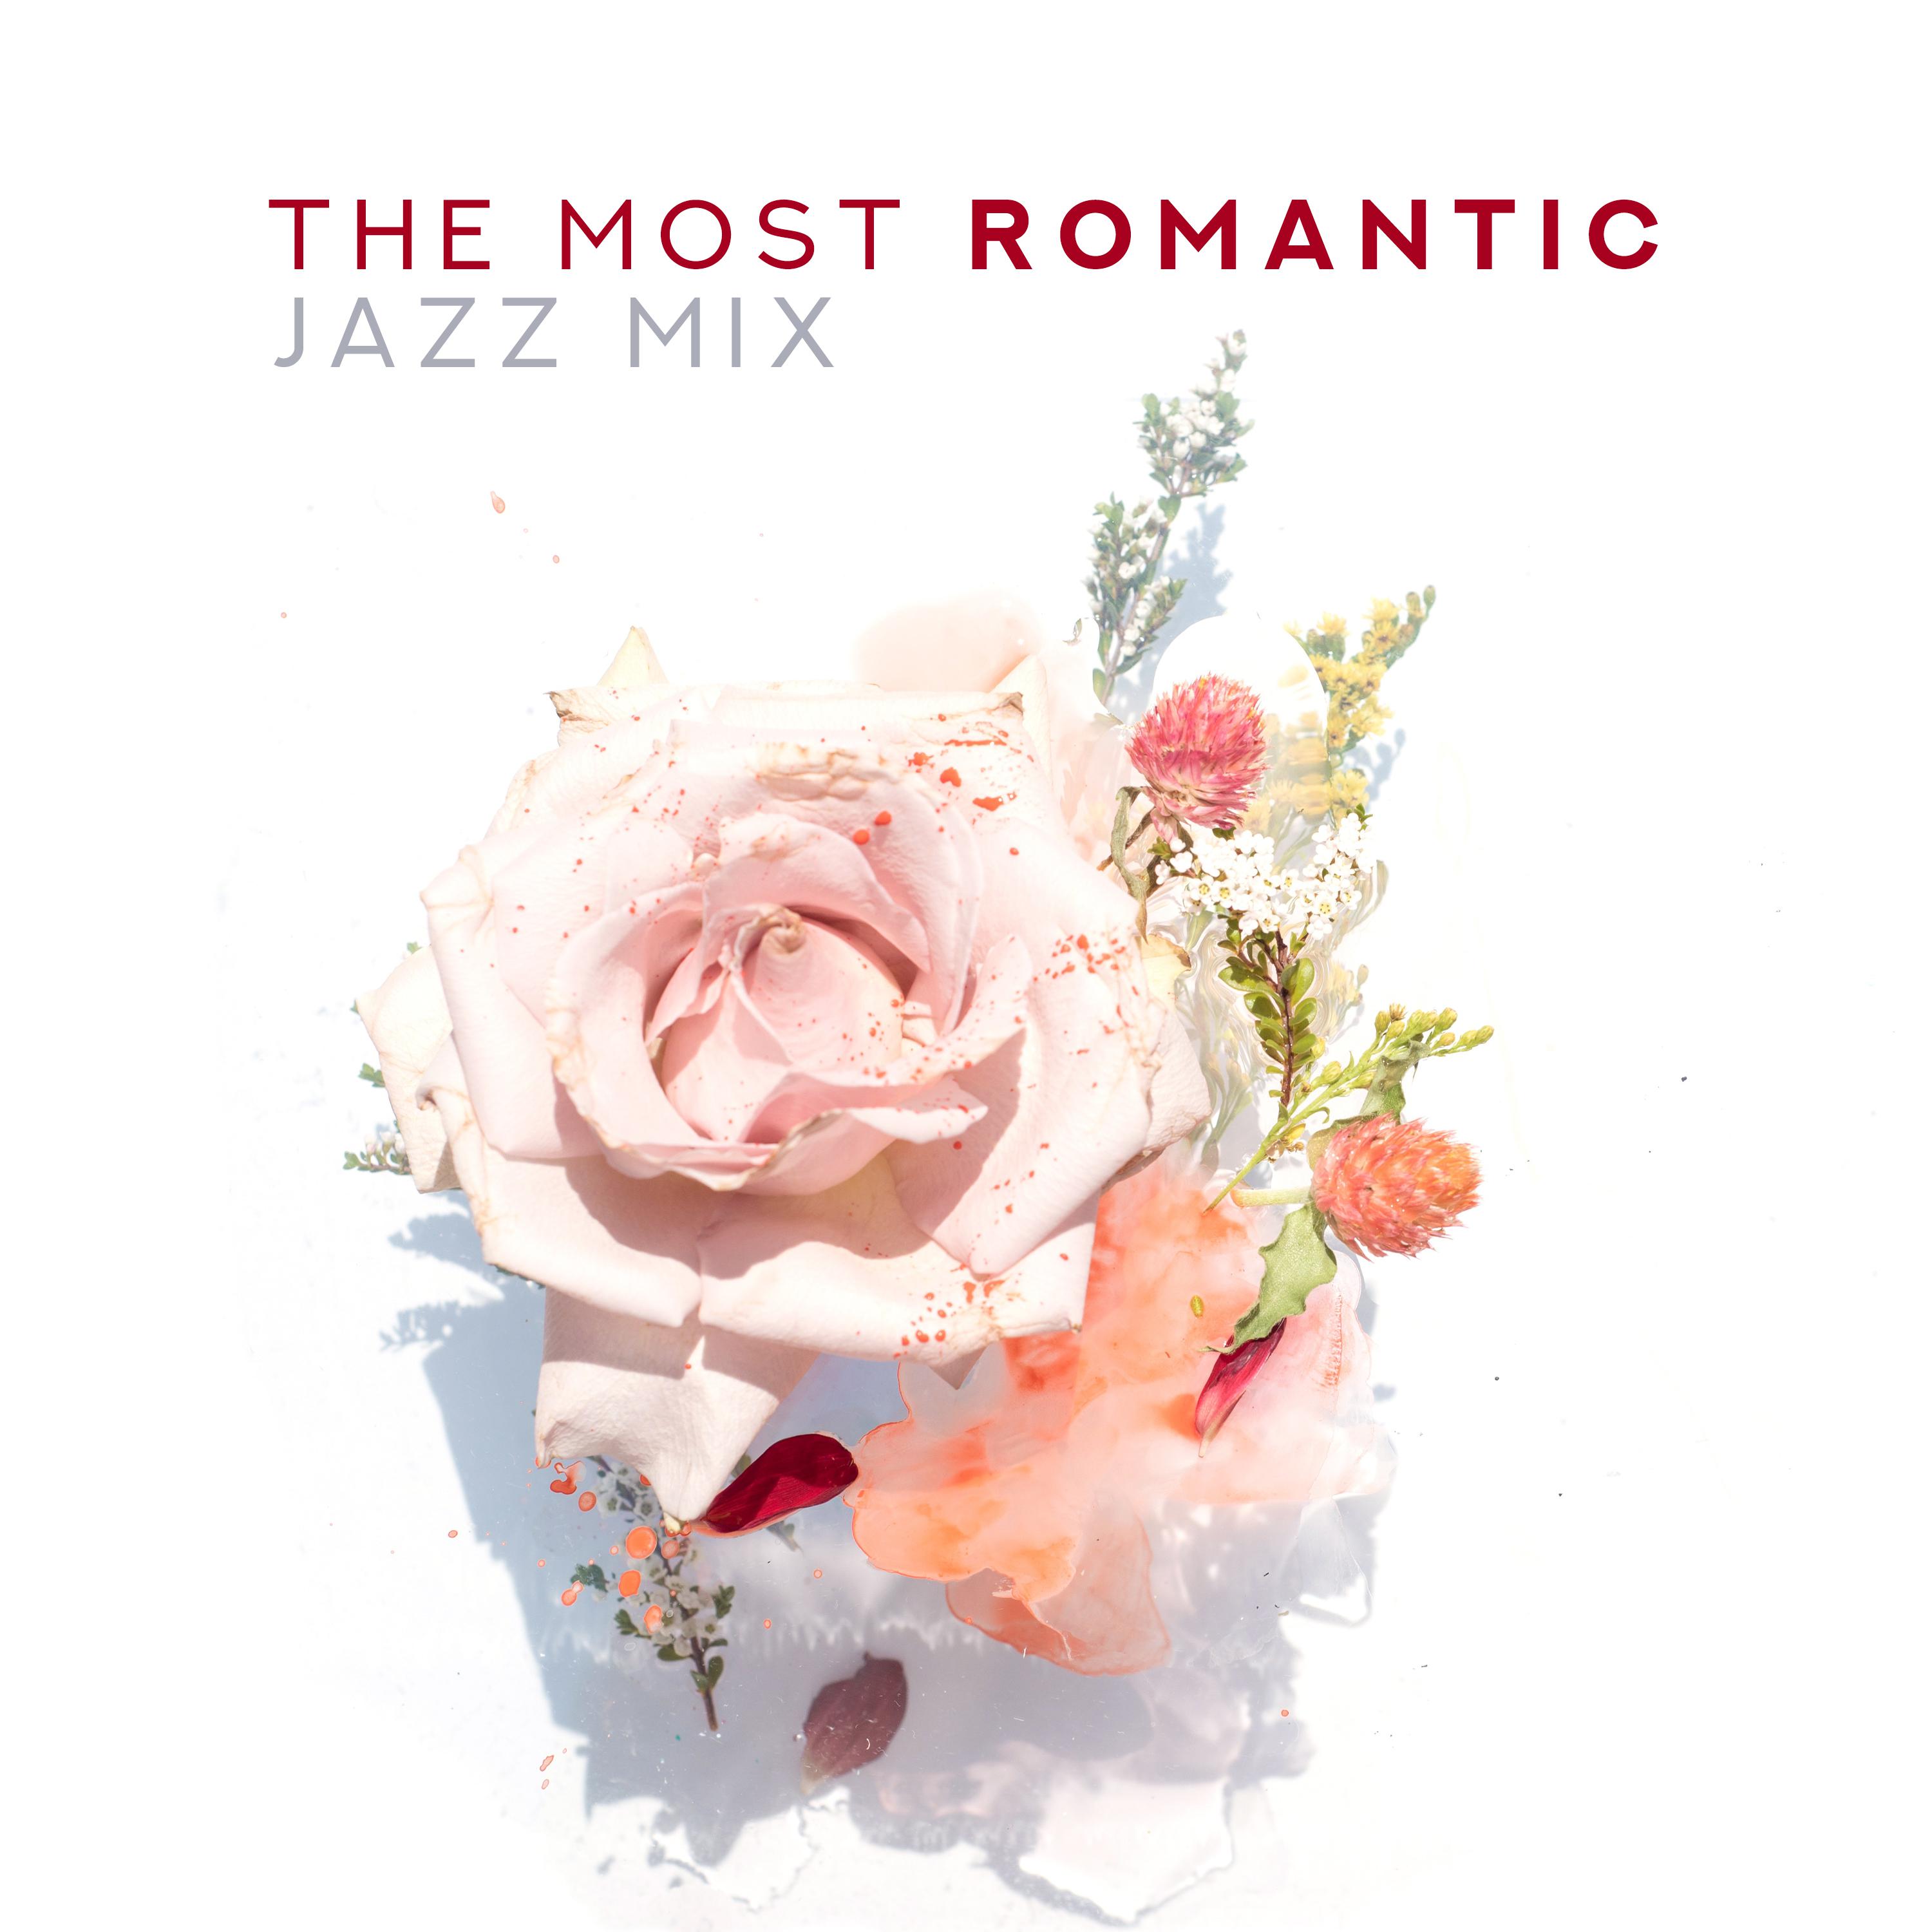 The Most Romantic Jazz Mix: 2019 Smooth Jazz Instrumental Music Compilation, Slow  Sensual Songs Perfect for Couple' s Private Moments in Restaurant or at Home, Vintage Piano, Sax  Trombone Sounds